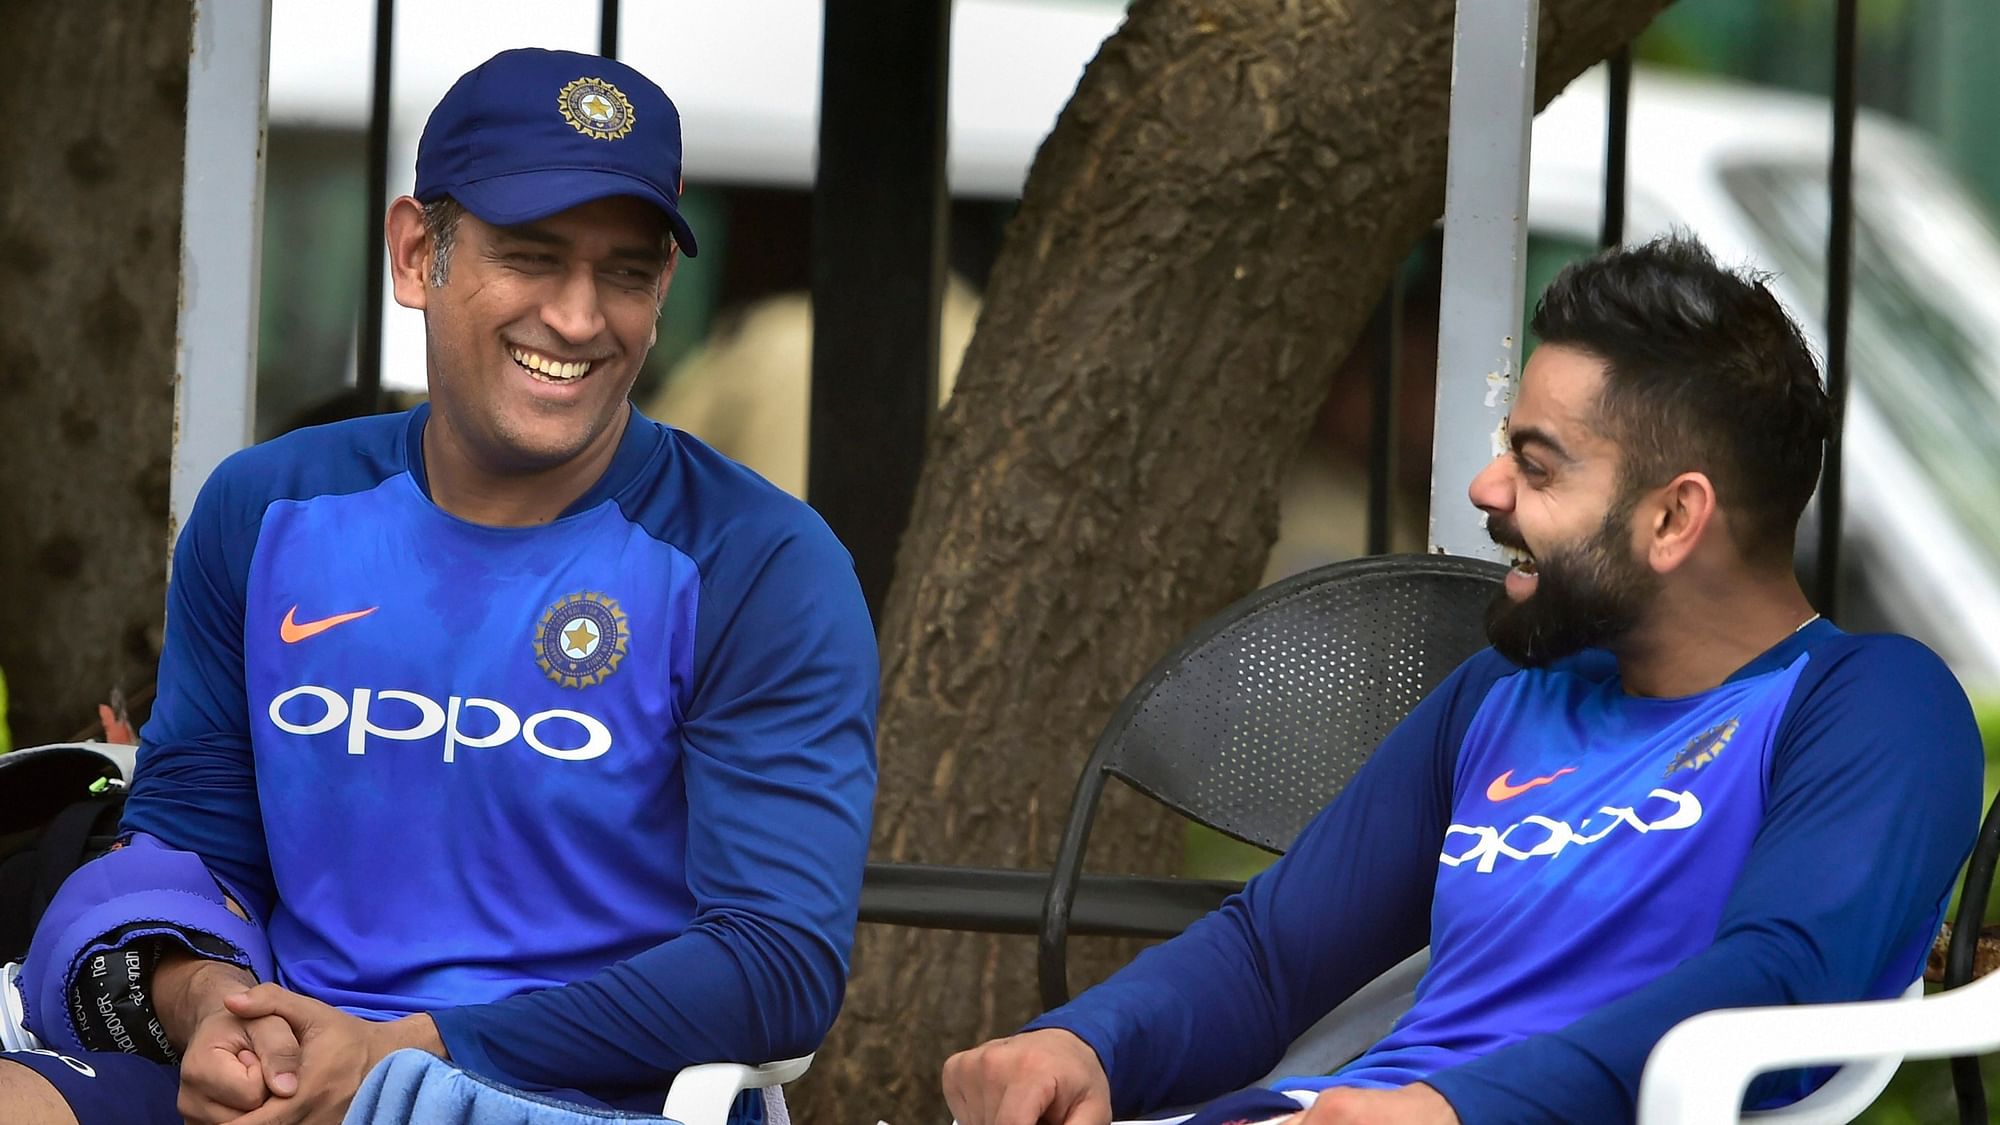 MS Dhoni, Rohit Sharma and Virat Kohli are present in both the limited over sides while Kohli finds a place in the Test team as well.